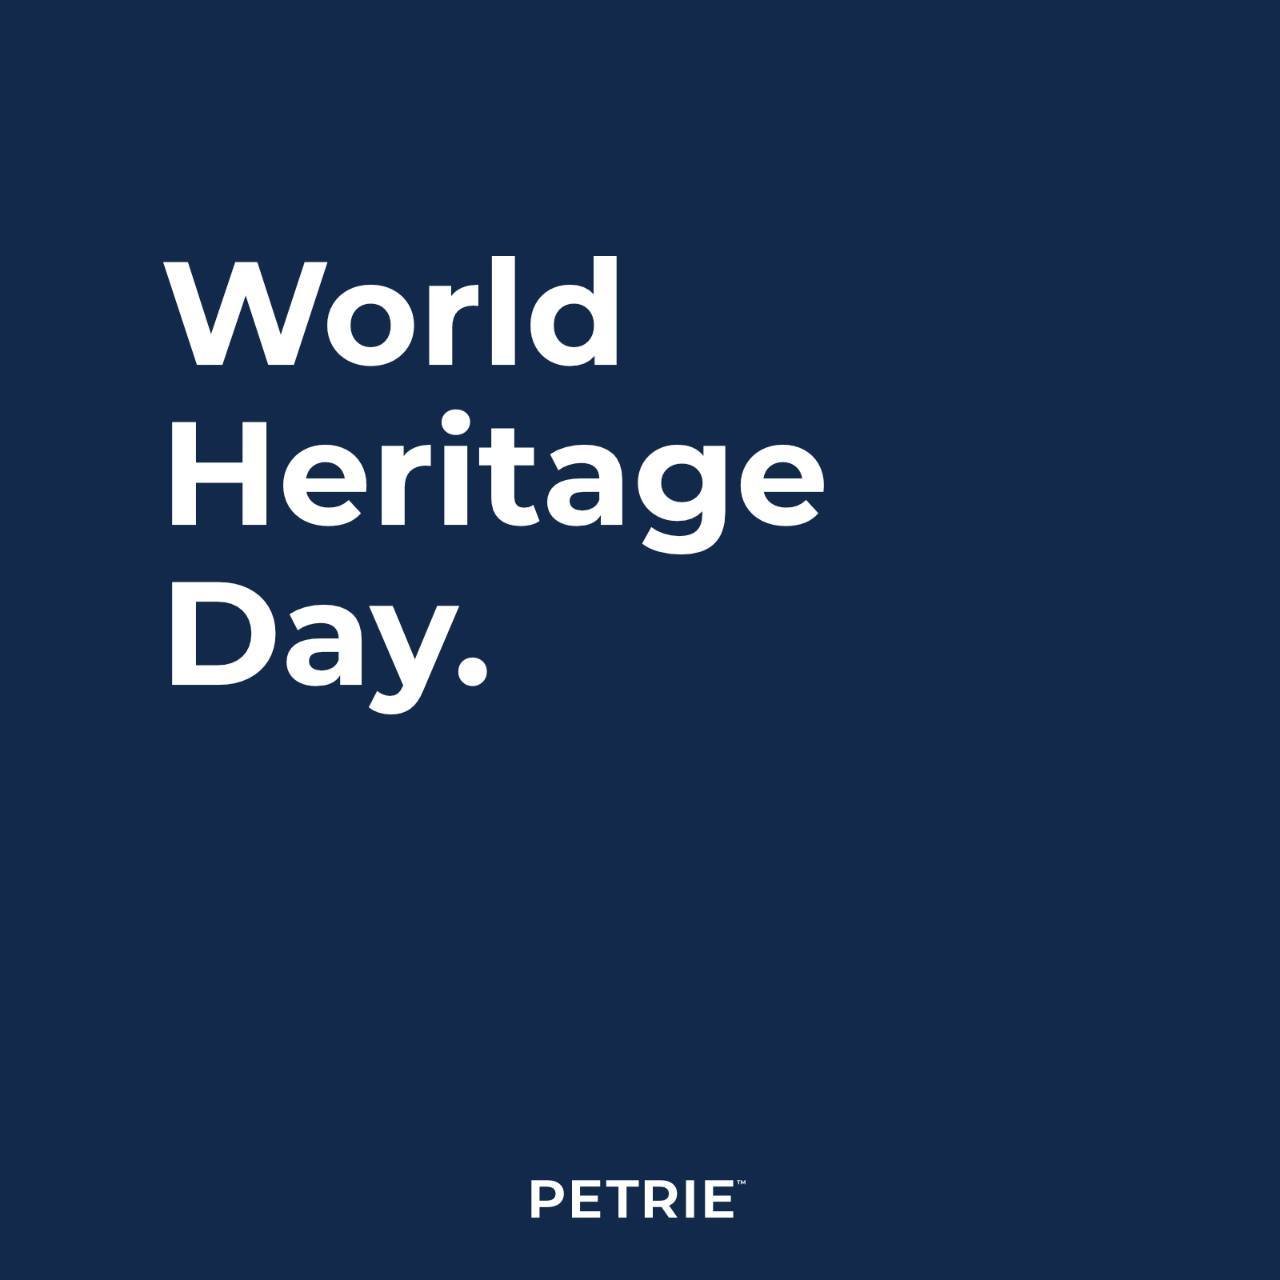 Petrie is extremely proud to have contributed to many of Brisbane's iconic heritage sites and monuments with a legacy in Queensland's construction industry that spans over 180 years and 7 generations. Today on World Heritage Day we pay homage to the 